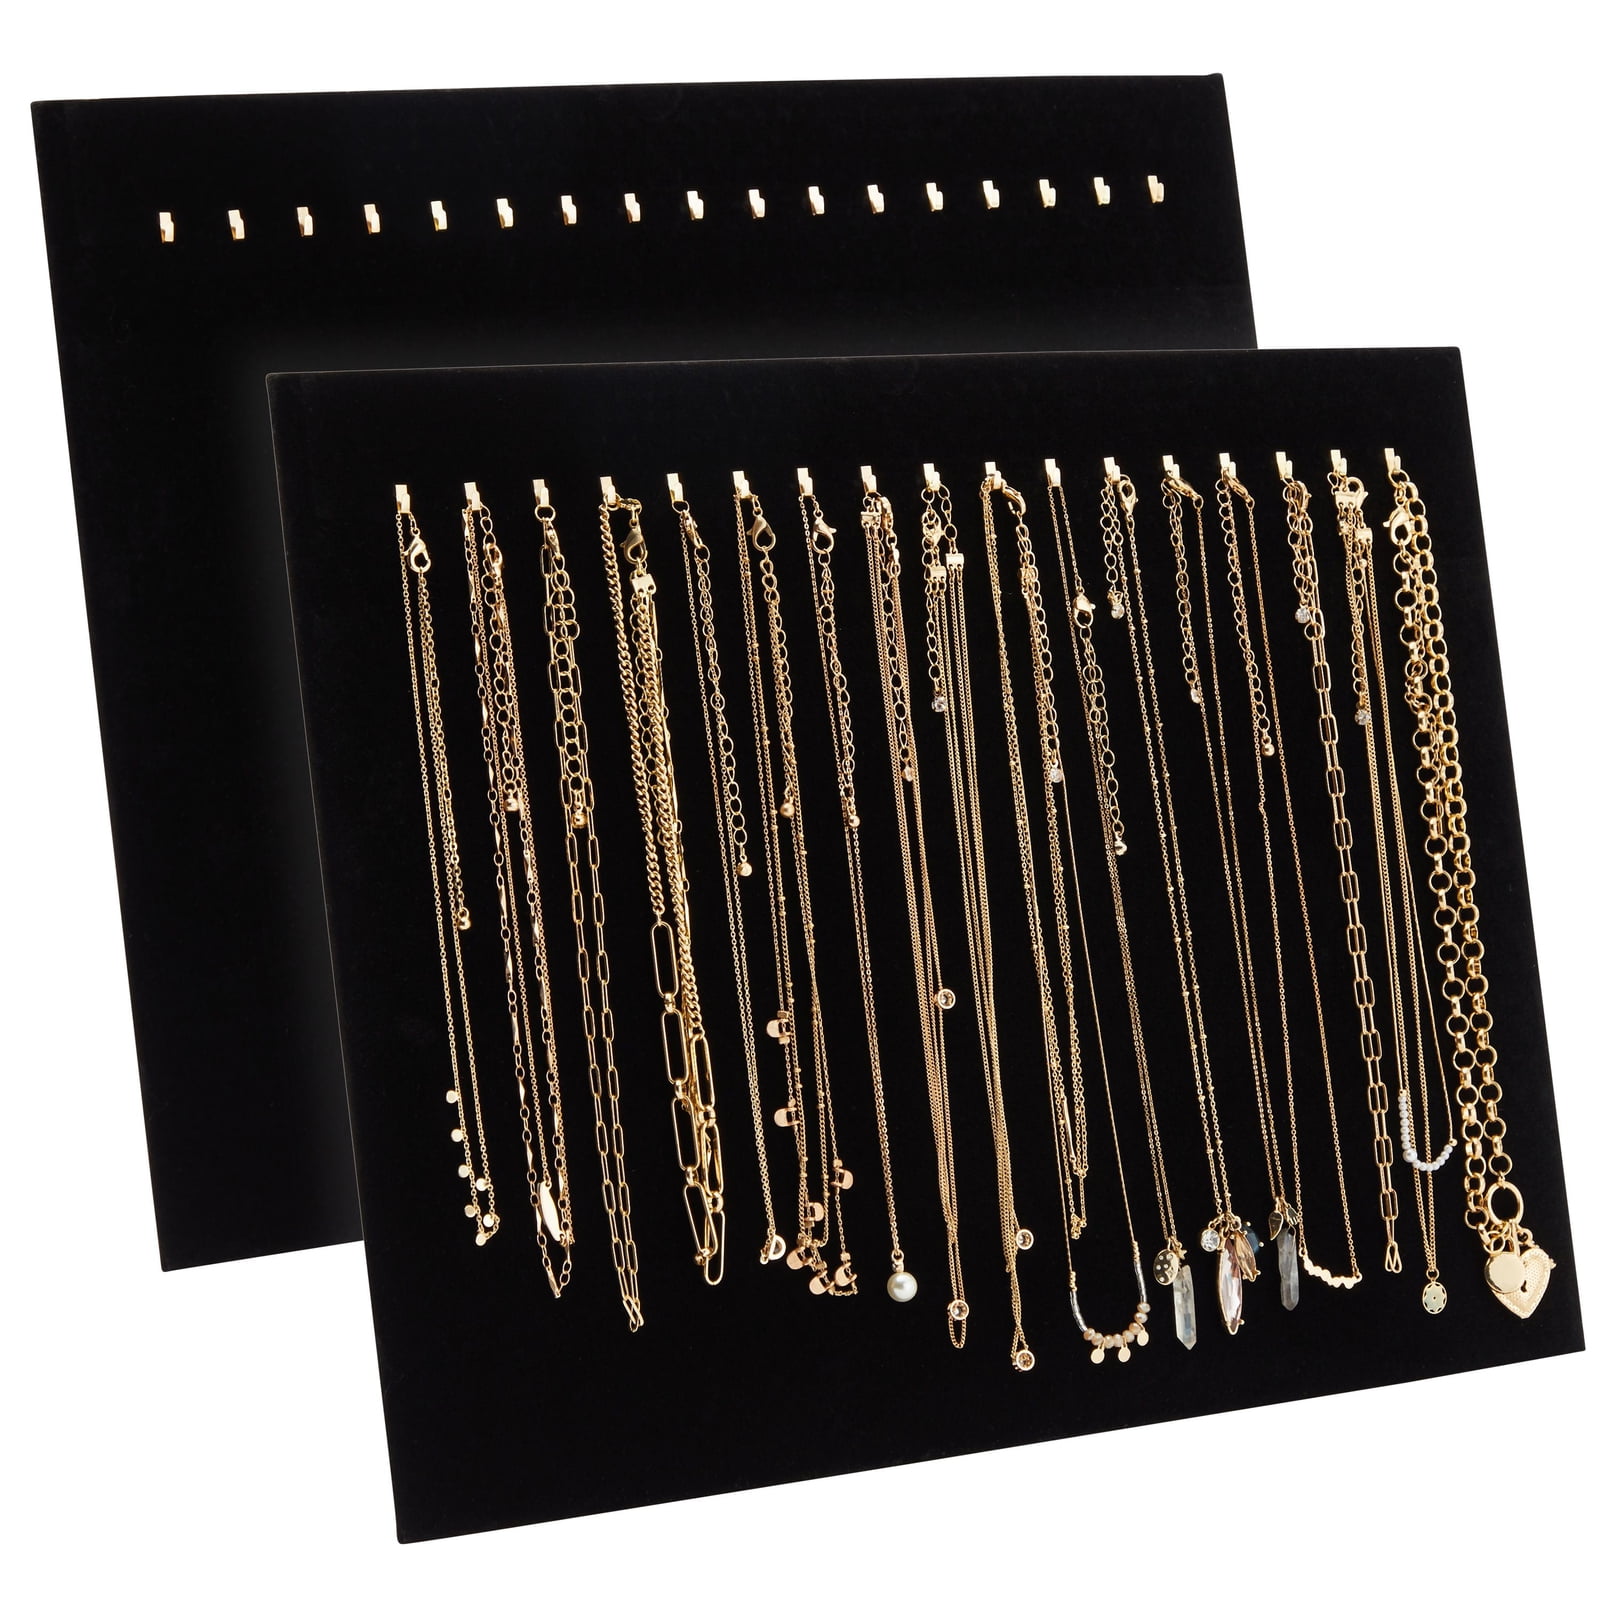 Velvet Flame Chain Bracelet Jewelry Necklace Display Stand Holder Organizer 